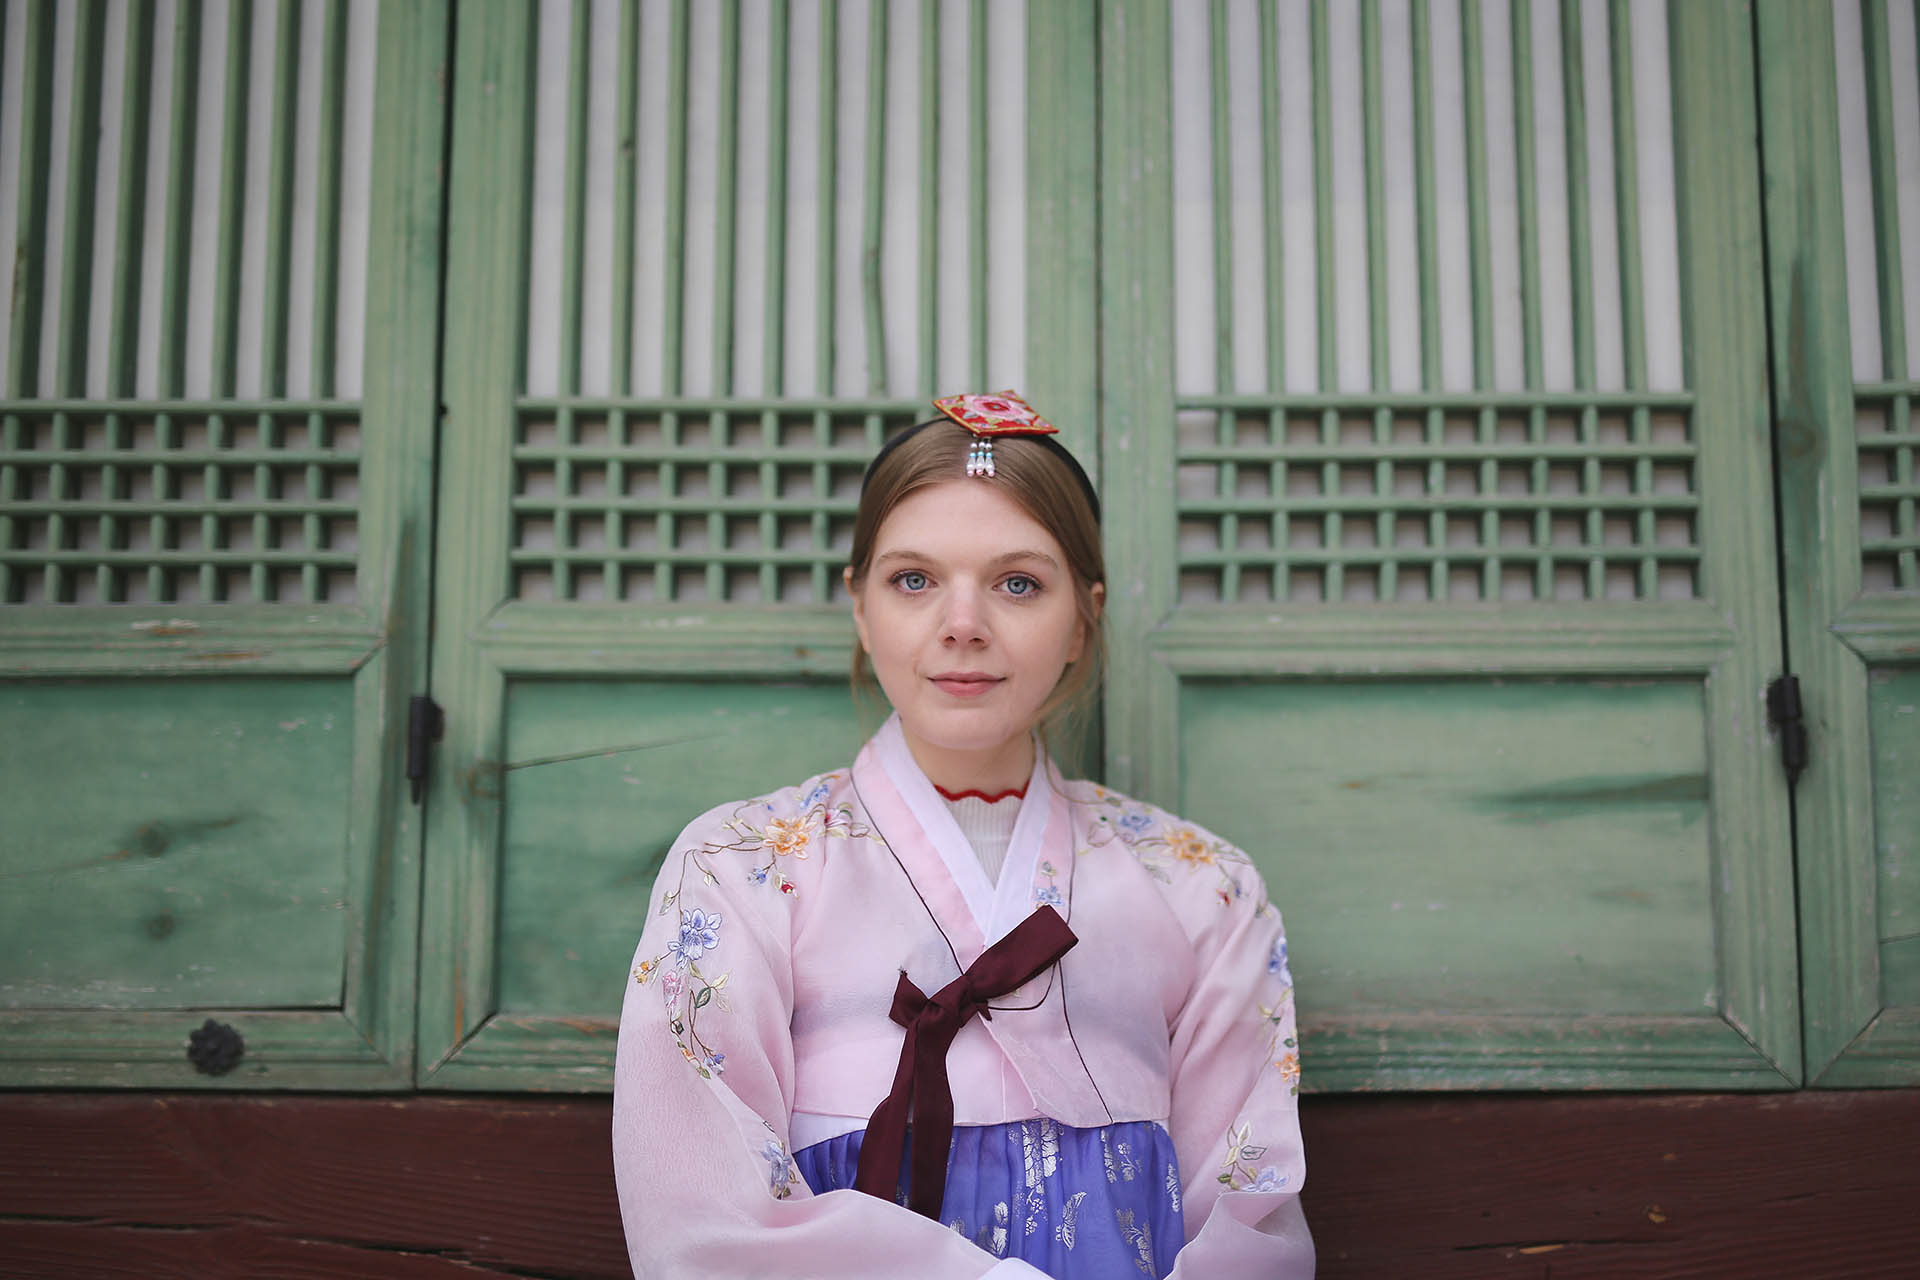 Why don't we take a picture wearing a beautiful hanbok at Gyeongbokgung Palace?